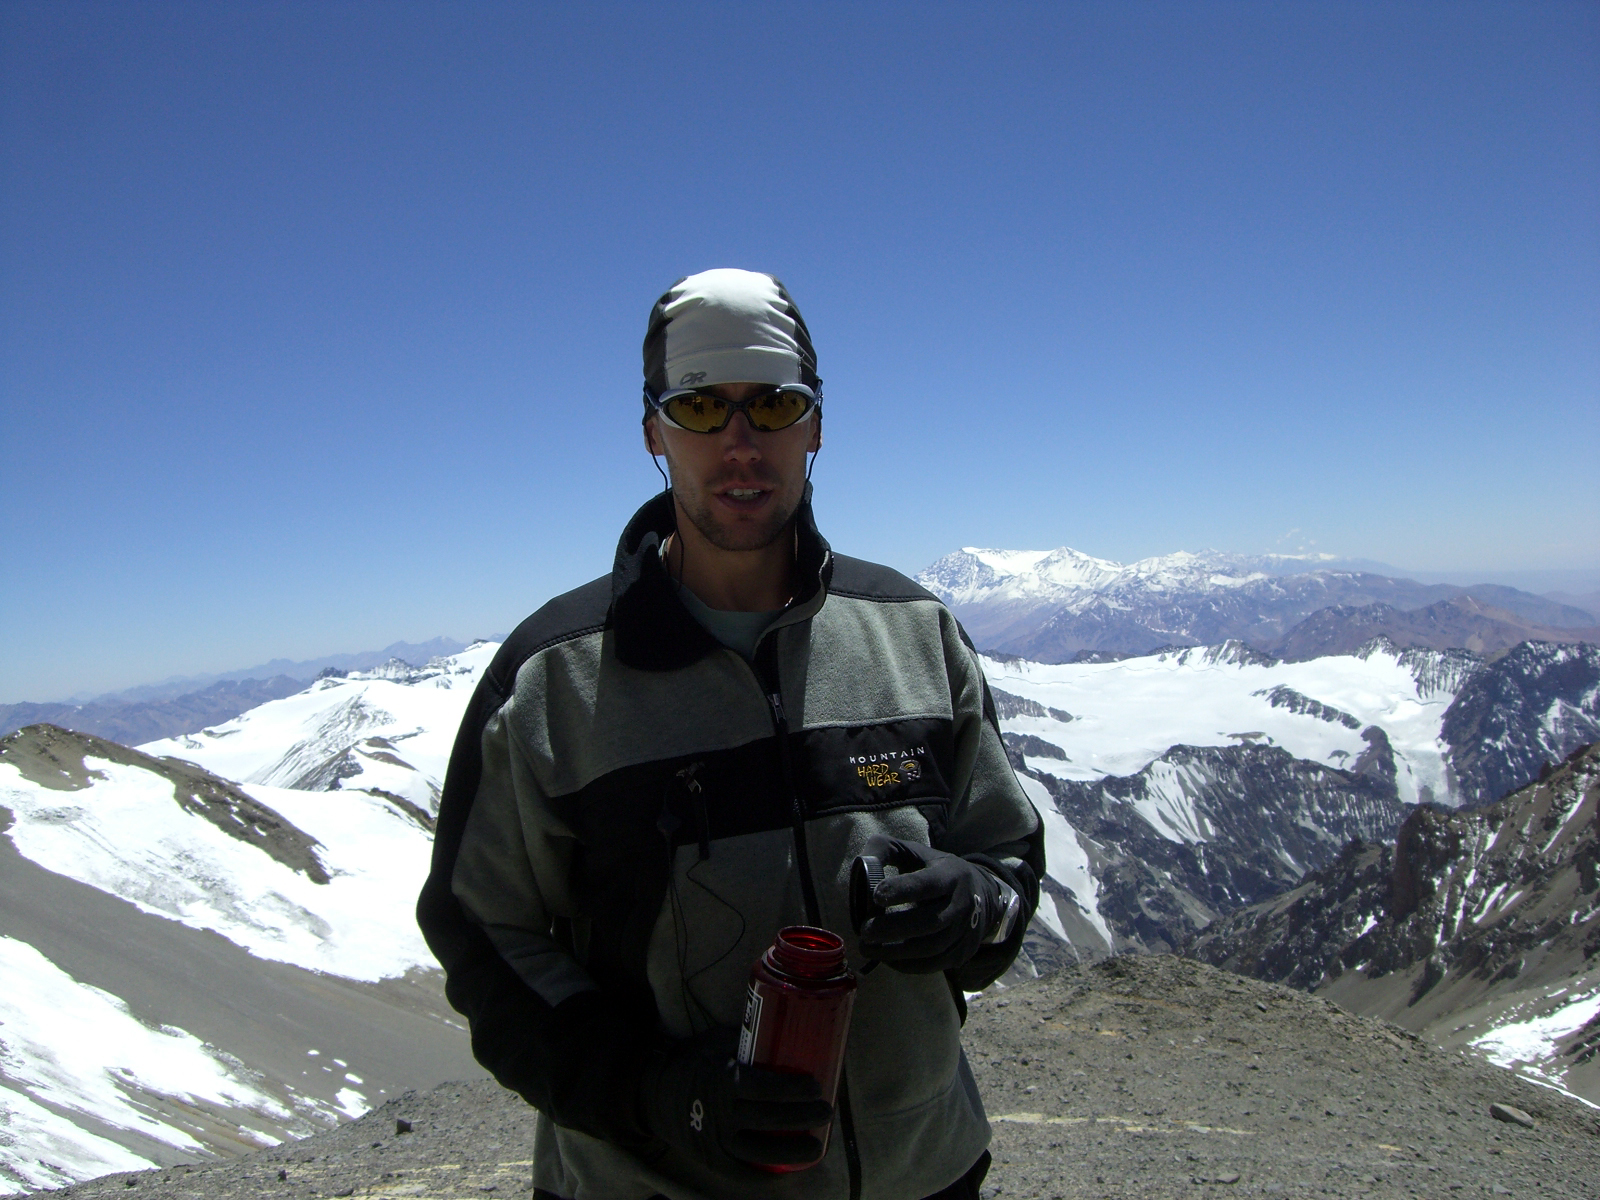 Cerro Aconcagua Expedition - High In The Argentine Andes